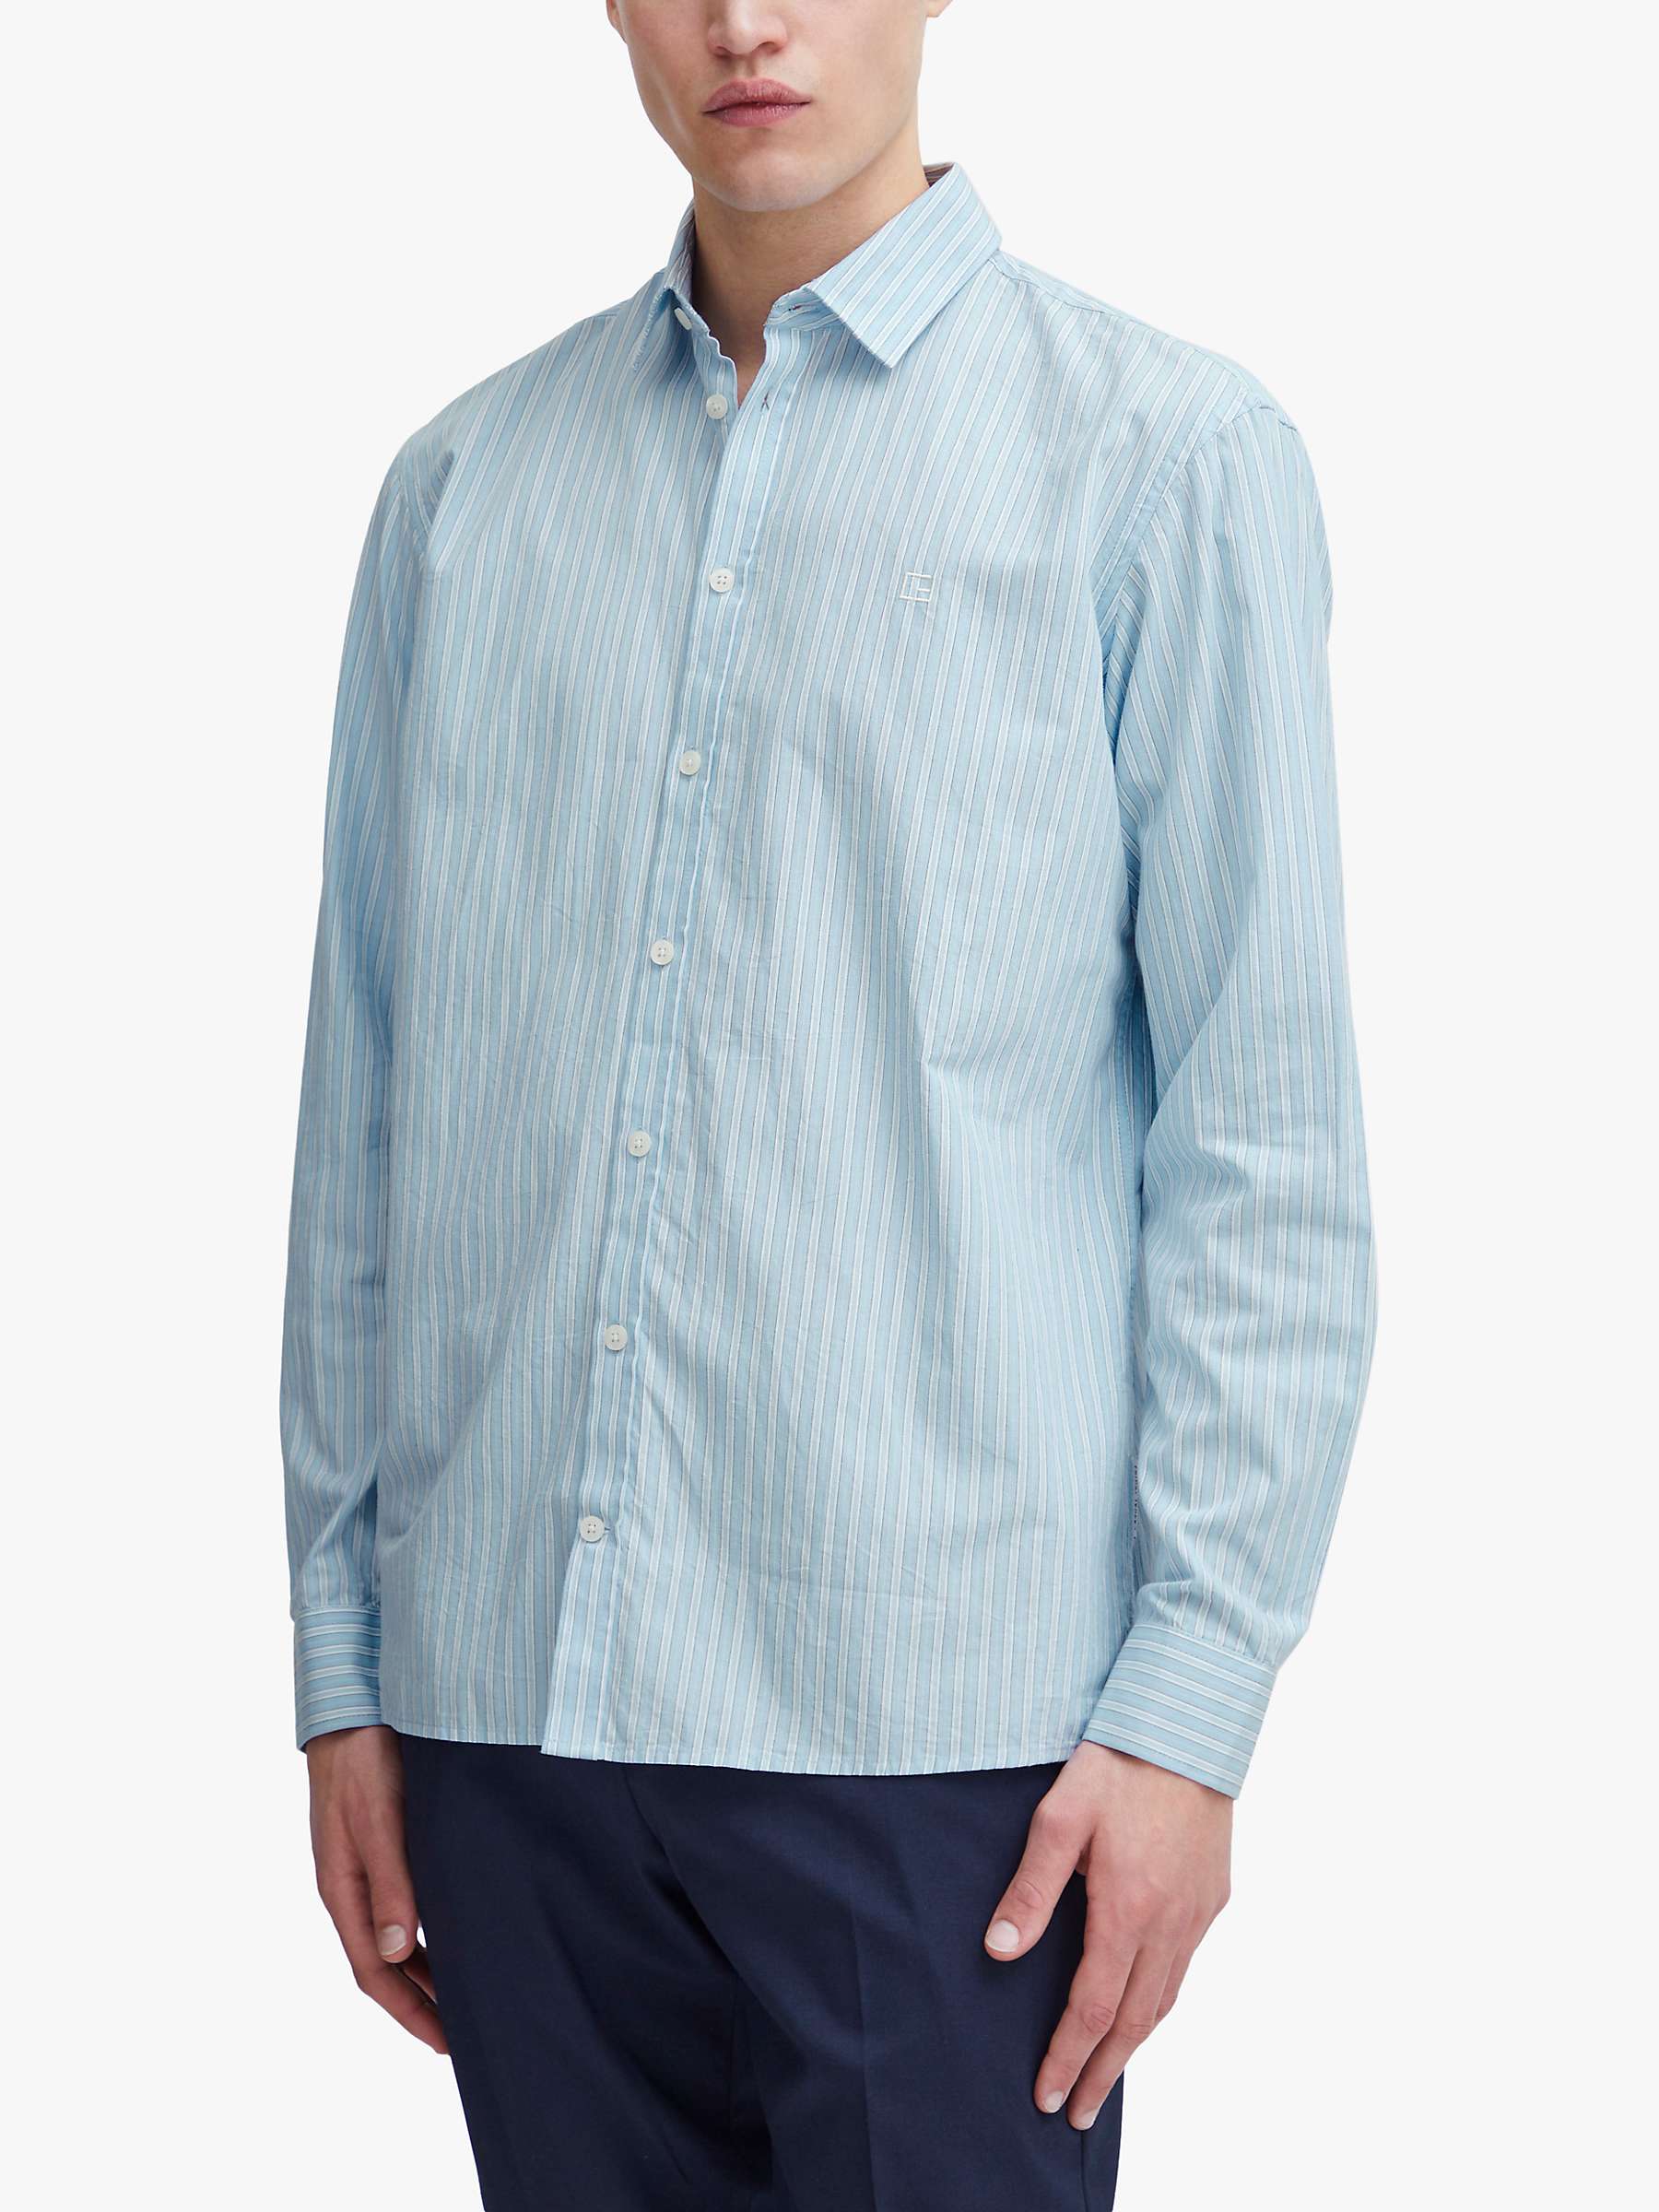 Buy Casual Friday Alvin Long Sleeve Striped Shirt, Chambray Blue Online at johnlewis.com